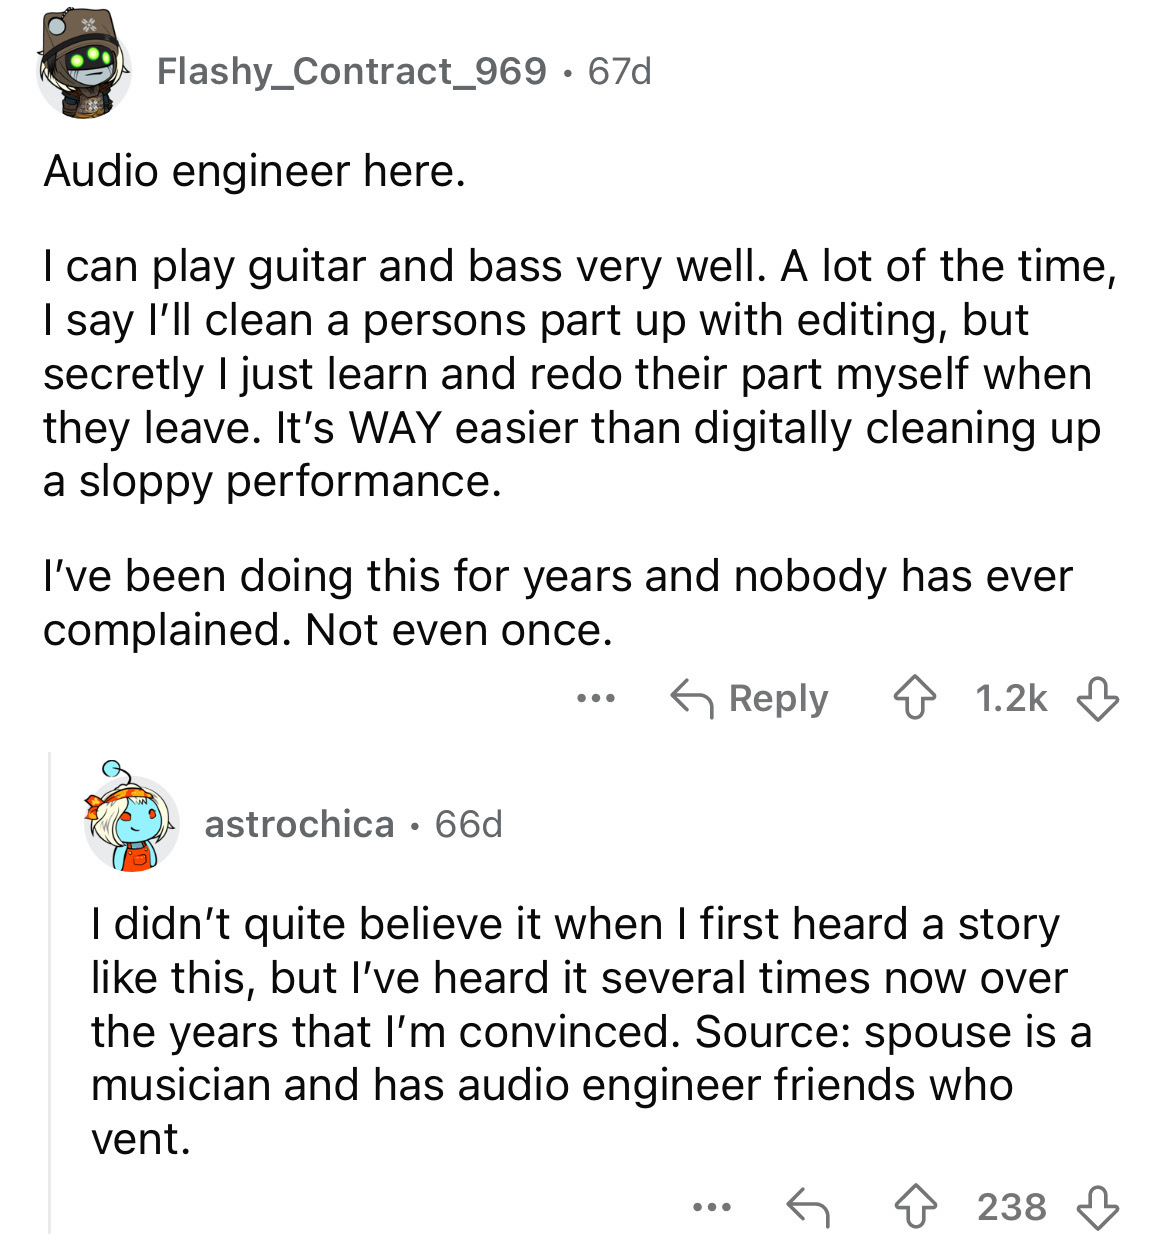 screenshot - Flashy_Contract_969 67d Audio engineer here. I can play guitar and bass very well. A lot of the time, I say I'll clean a persons part up with editing, but secretly I just learn and redo their part myself when they leave. It's Way easier than 